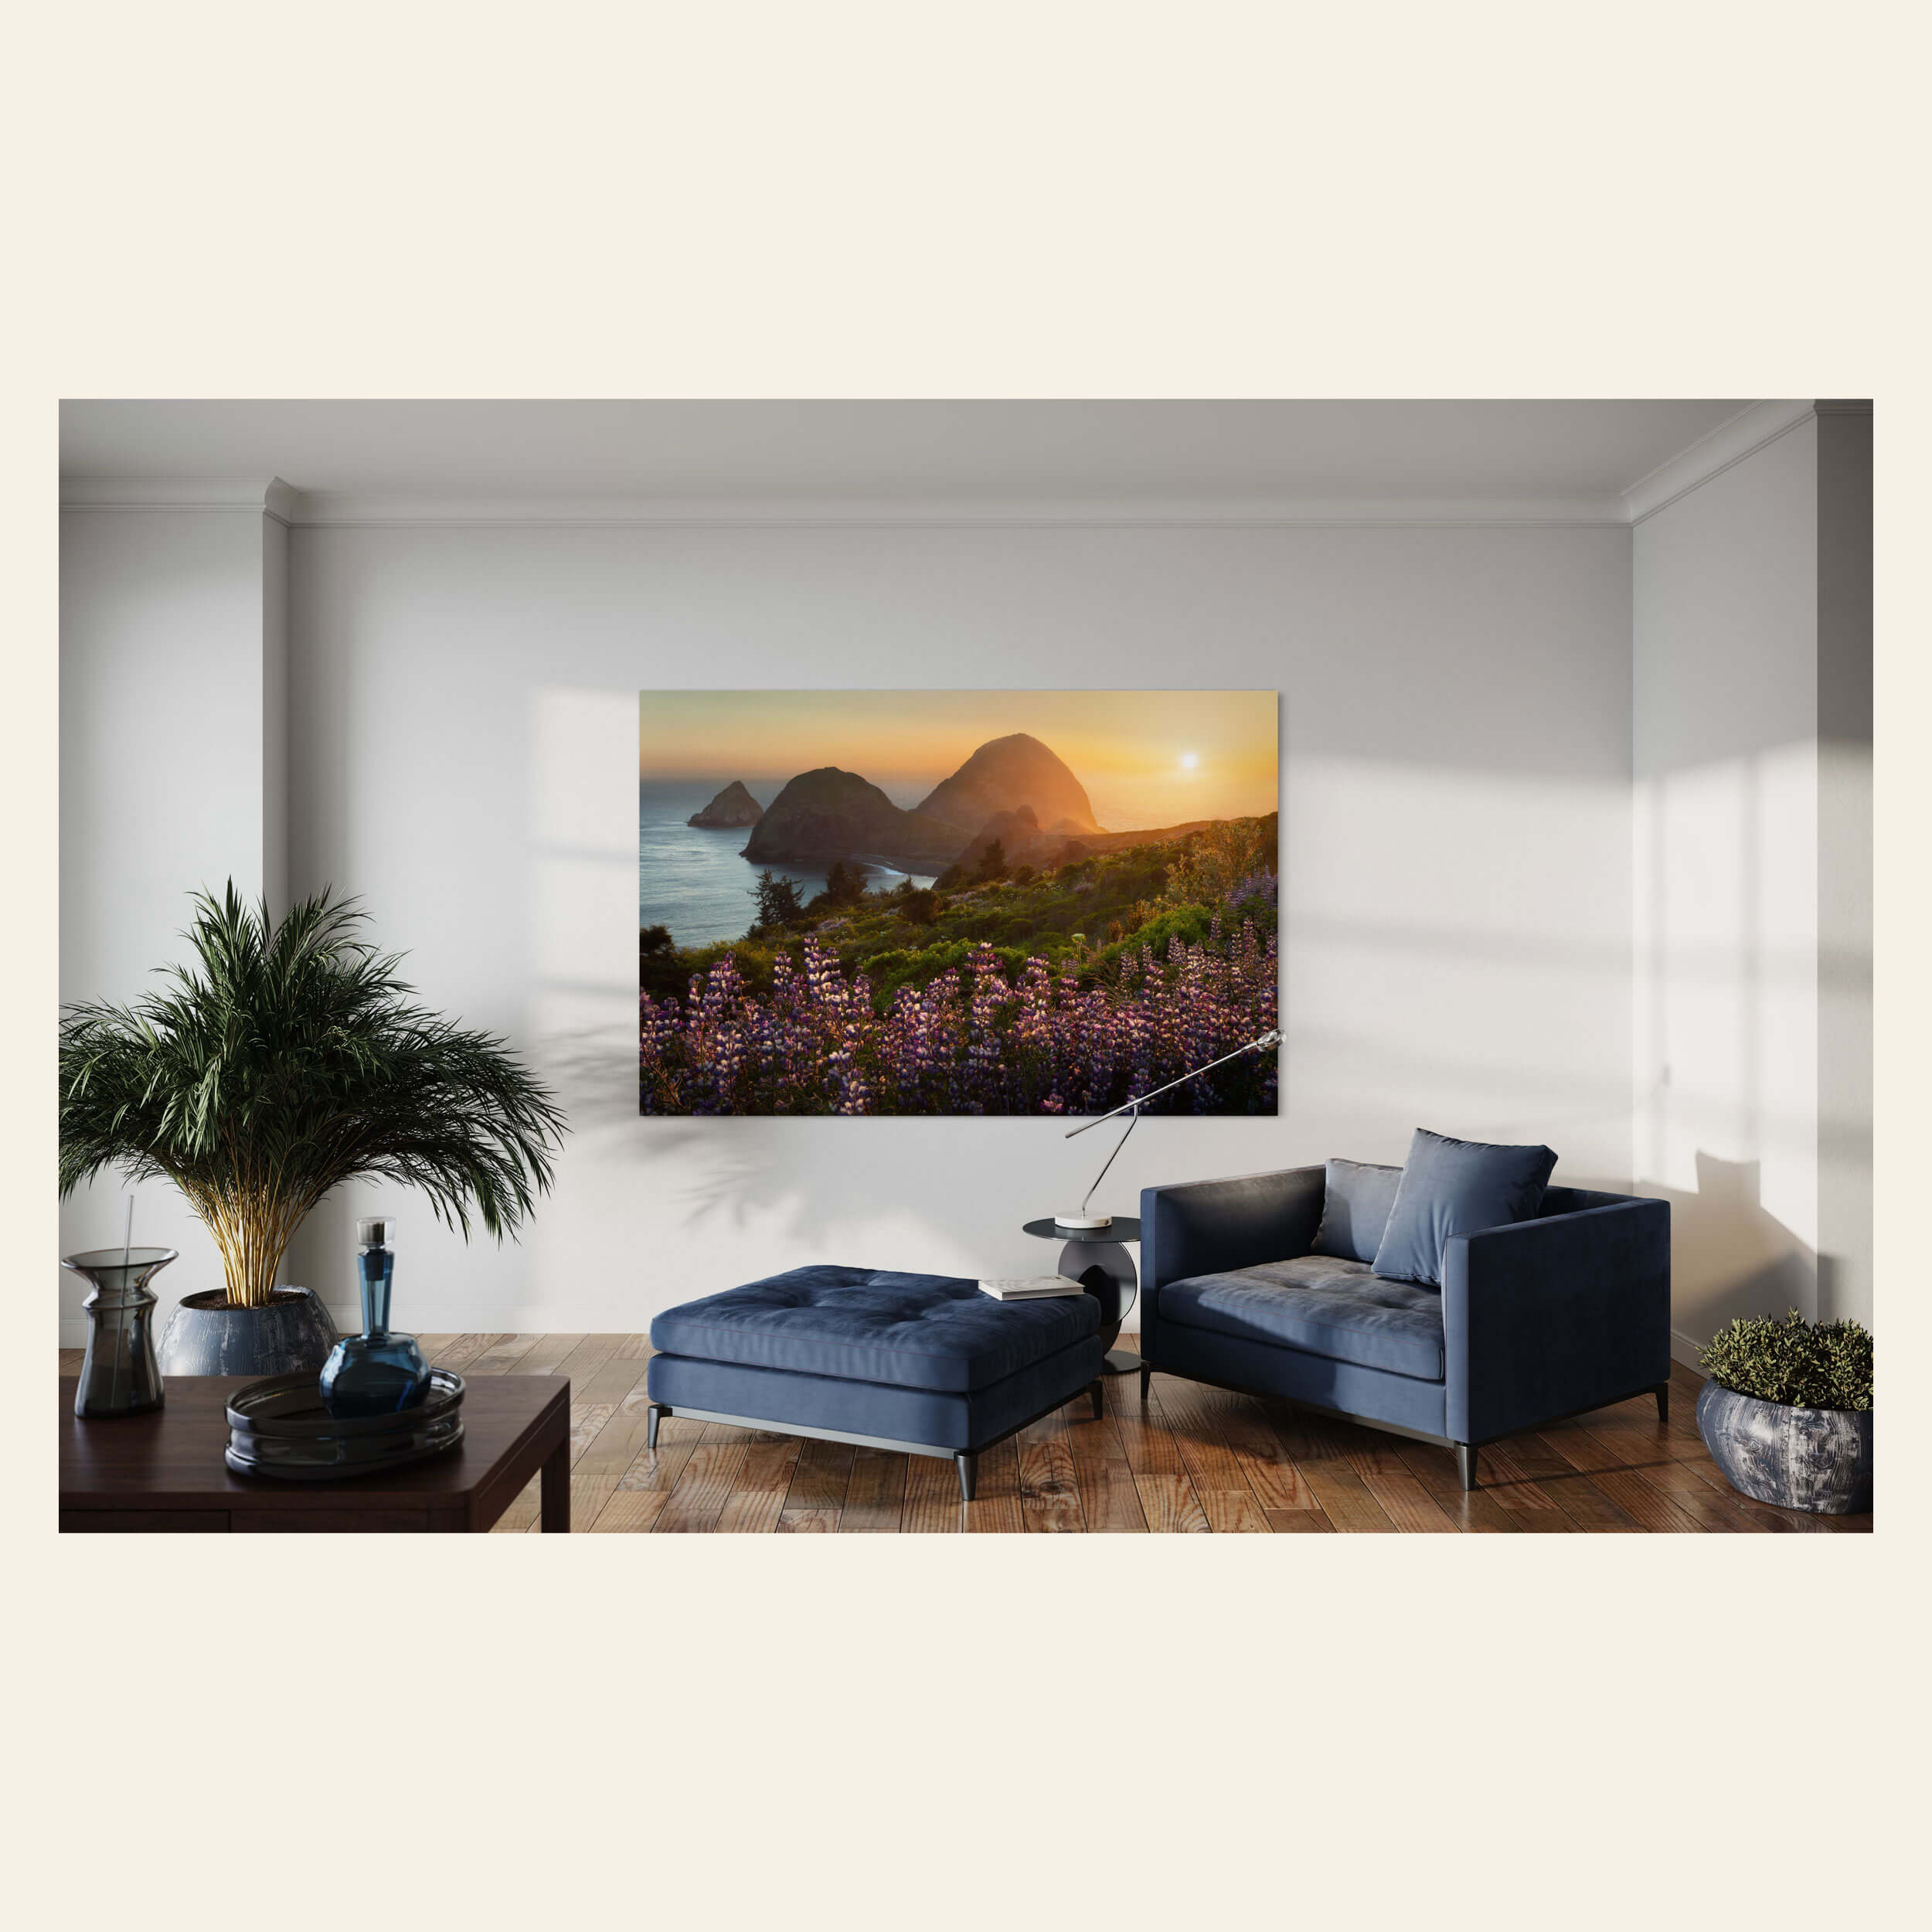 A wildflower picture of the Twin Sisters along the Oregon Coast hangs in a living room.